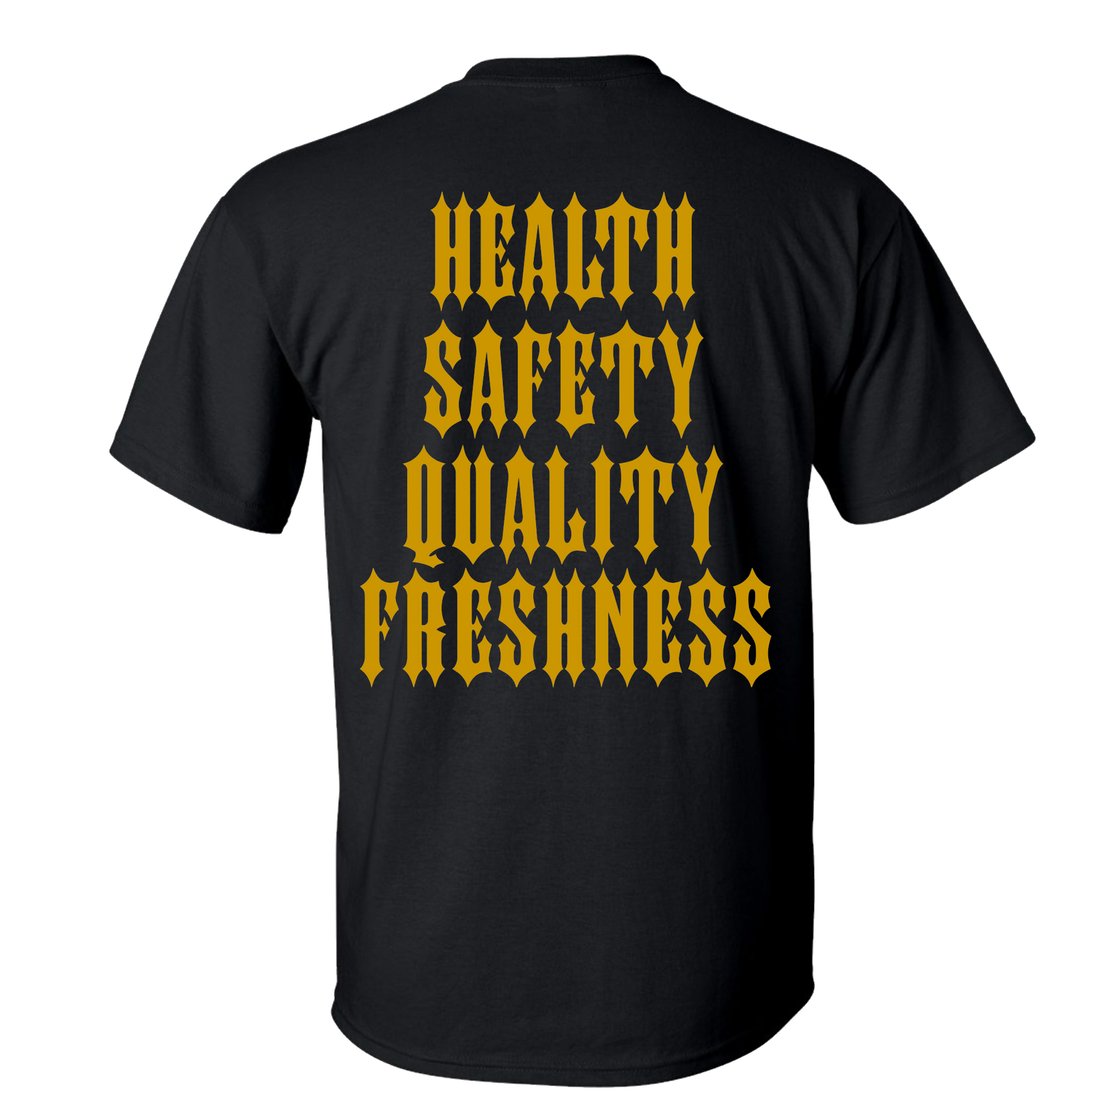 Image of Vinnie fresh’s Health & Safety Tall T-Shirt